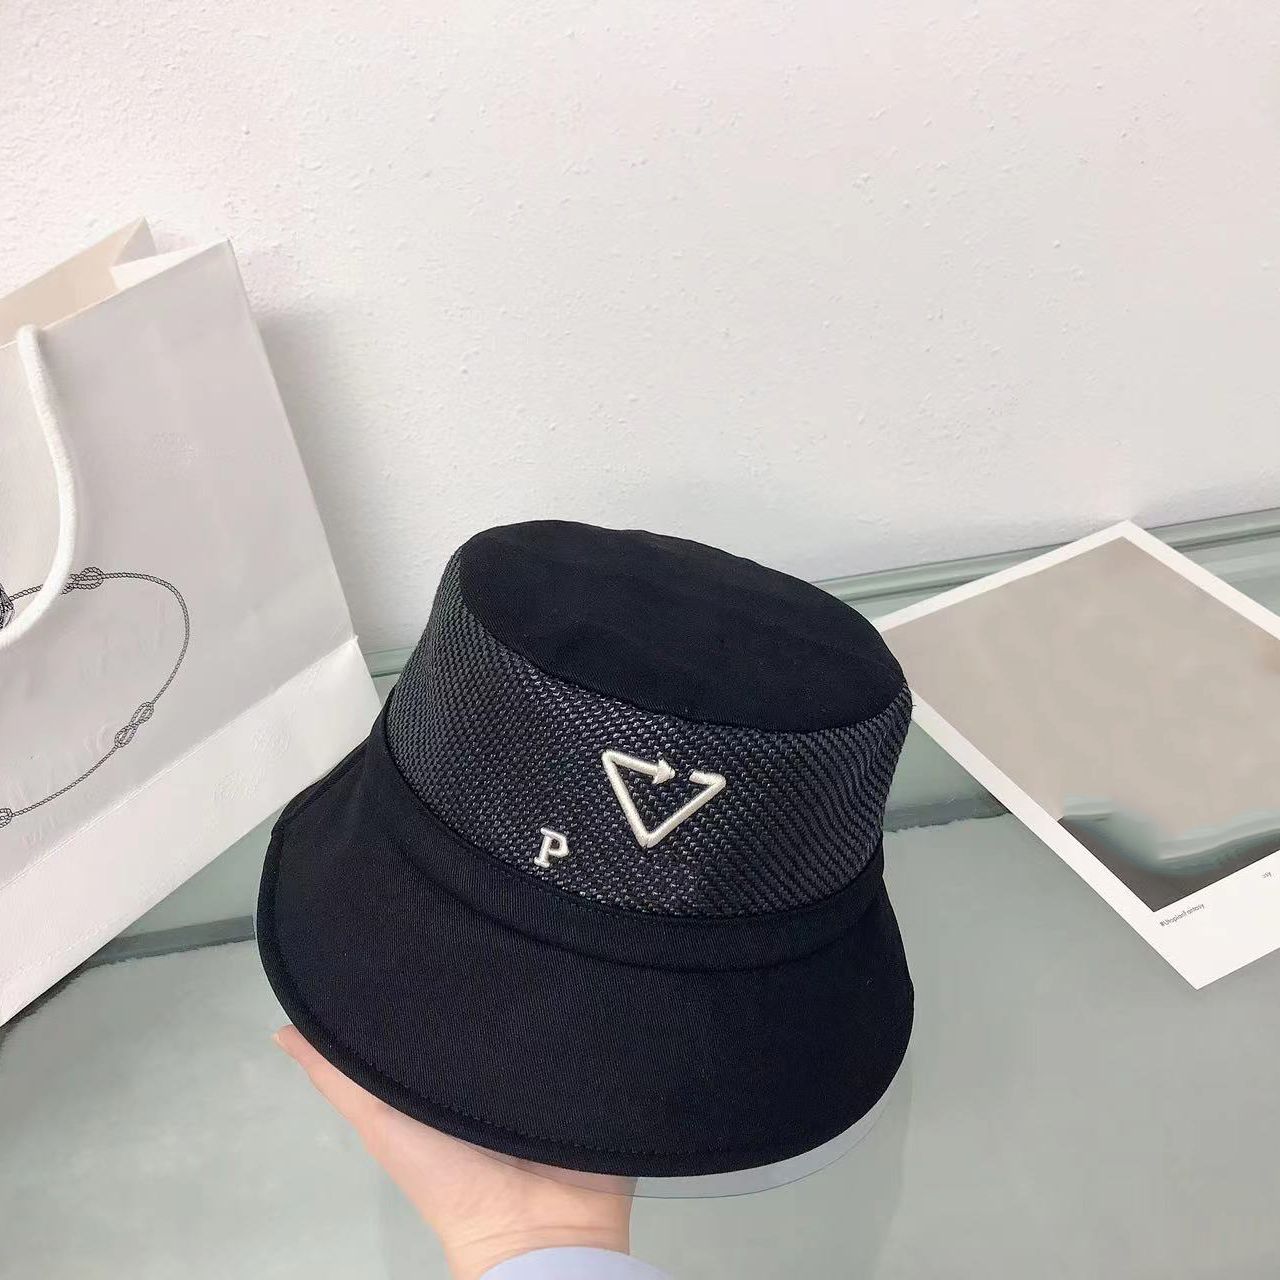 bucket hat Classic letter Triangular designers hats luxury sunshade men and women Elegant charm fashion trend Casual four Seasons gift summer hat Classic timeless